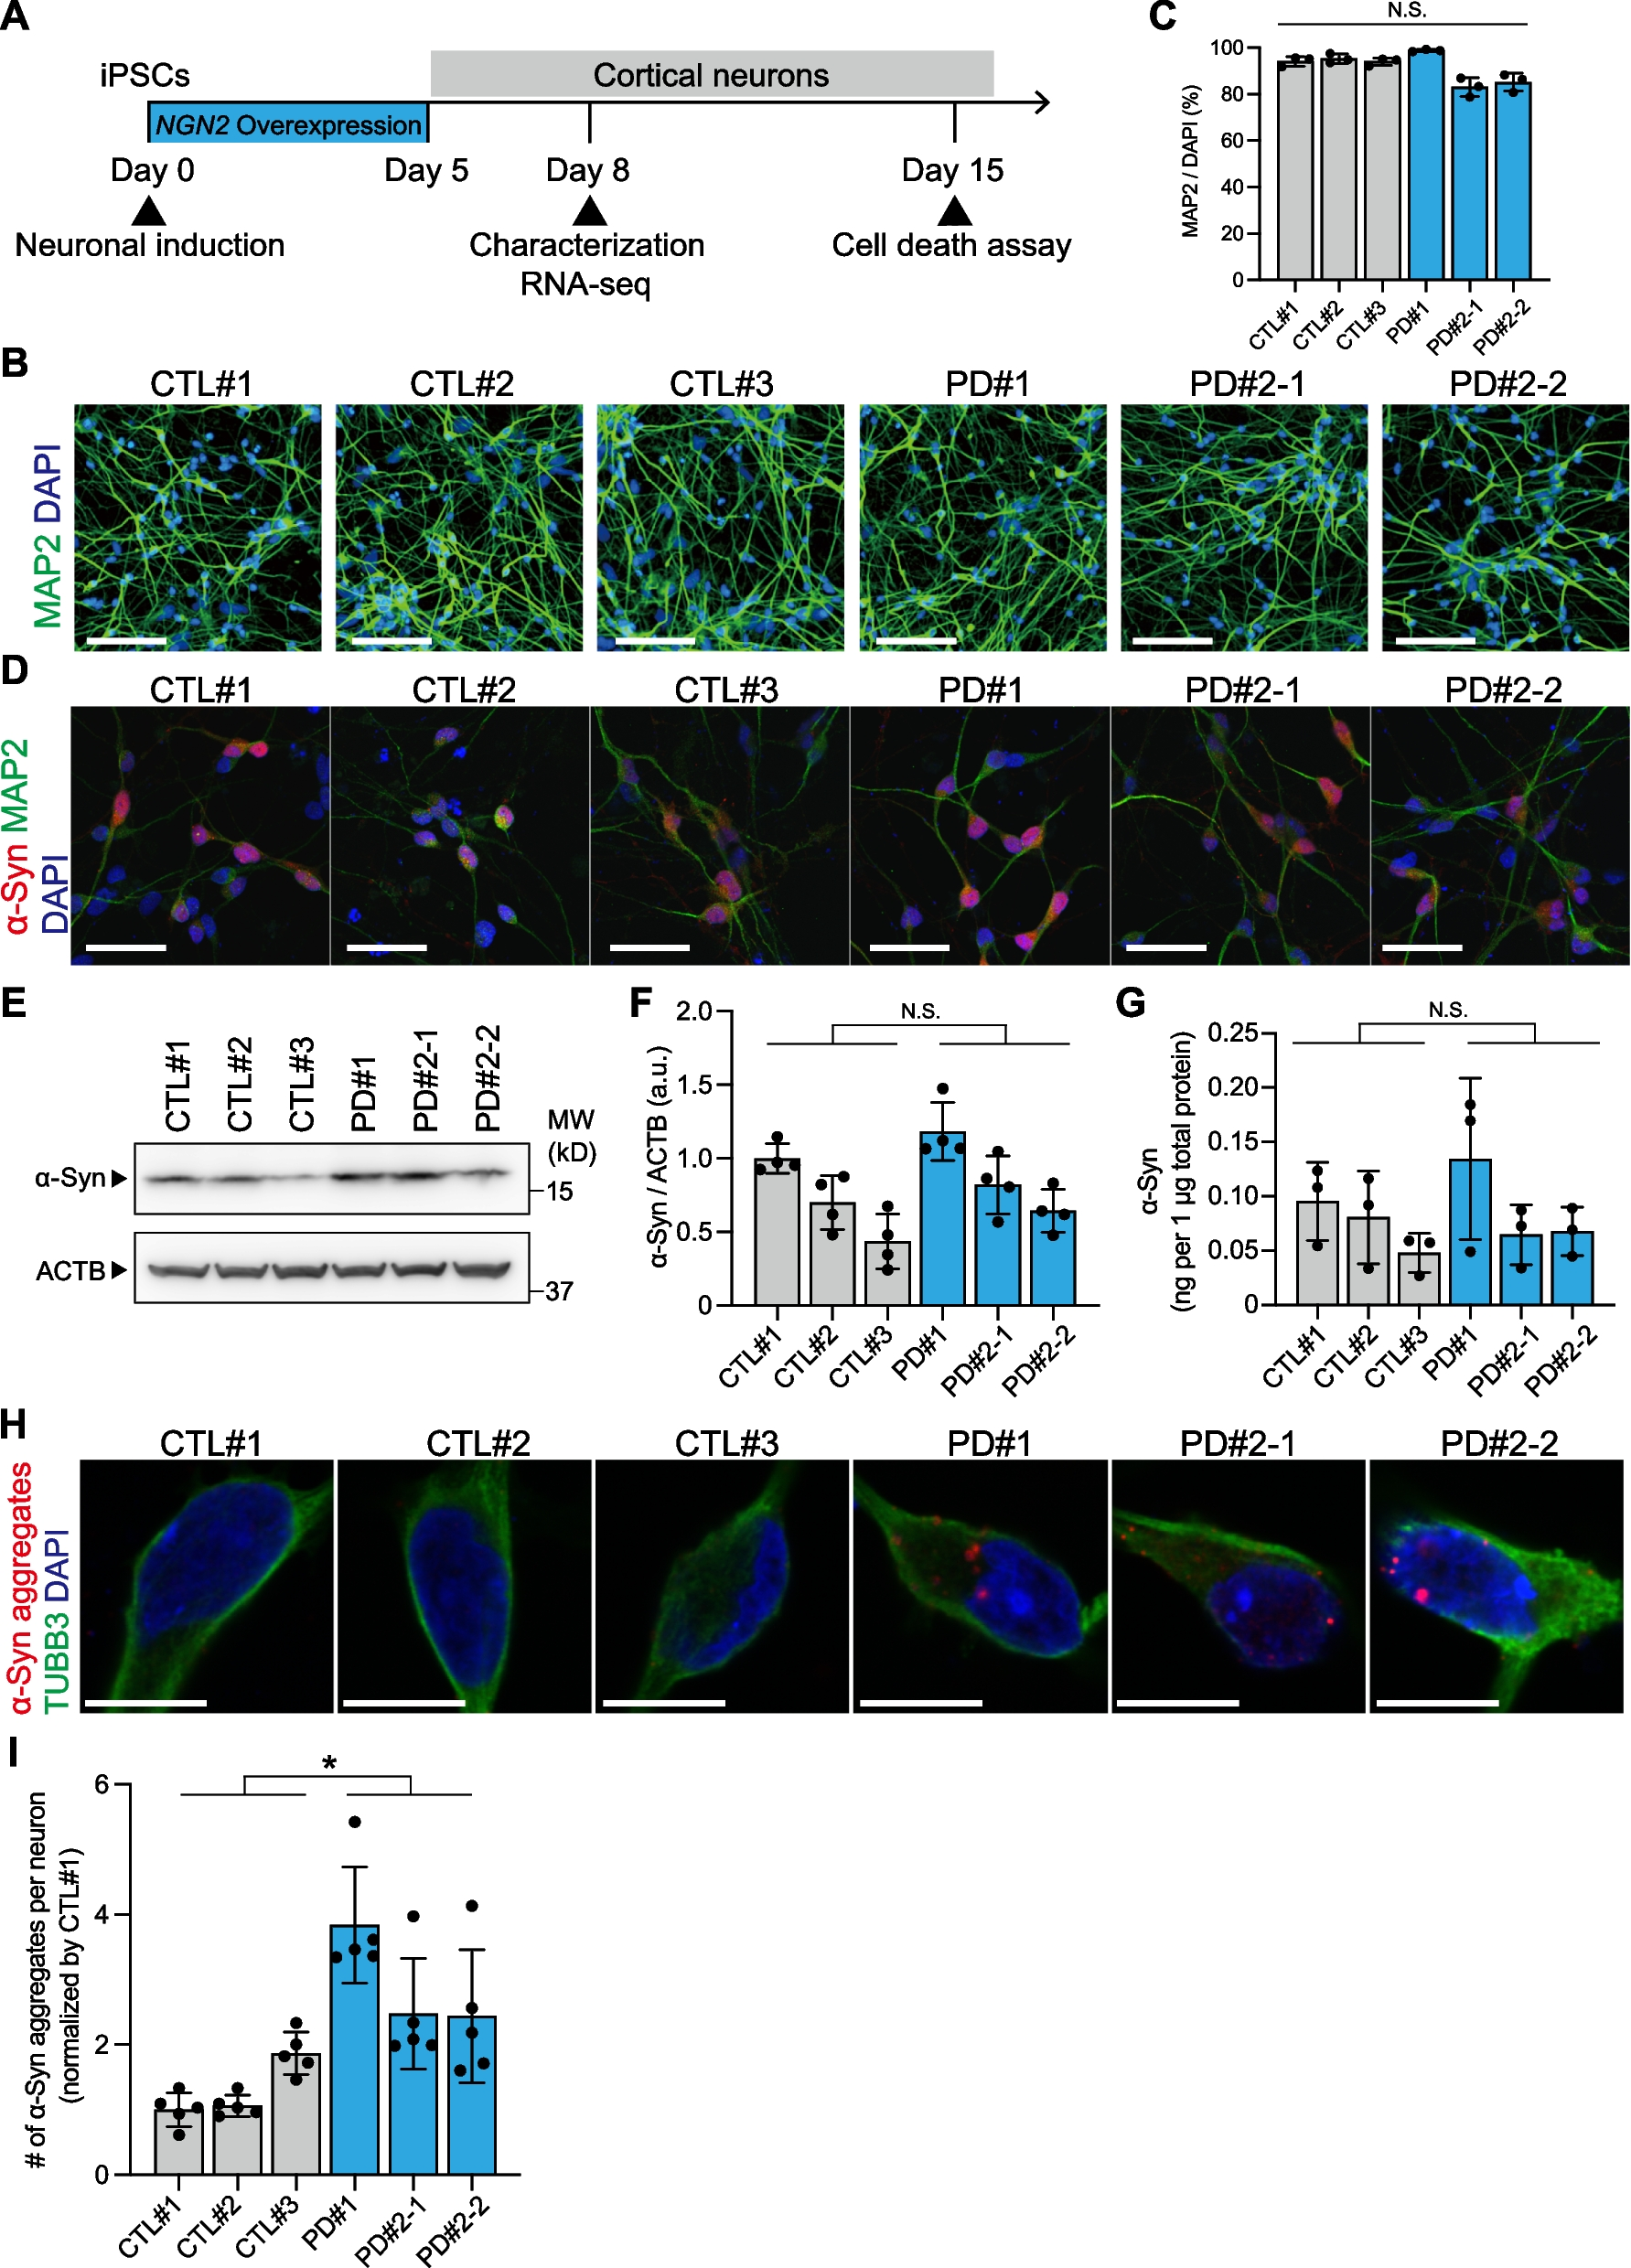 Mutant α-synuclein causes death of human cortical neurons via ERK1/2 and JNK activation